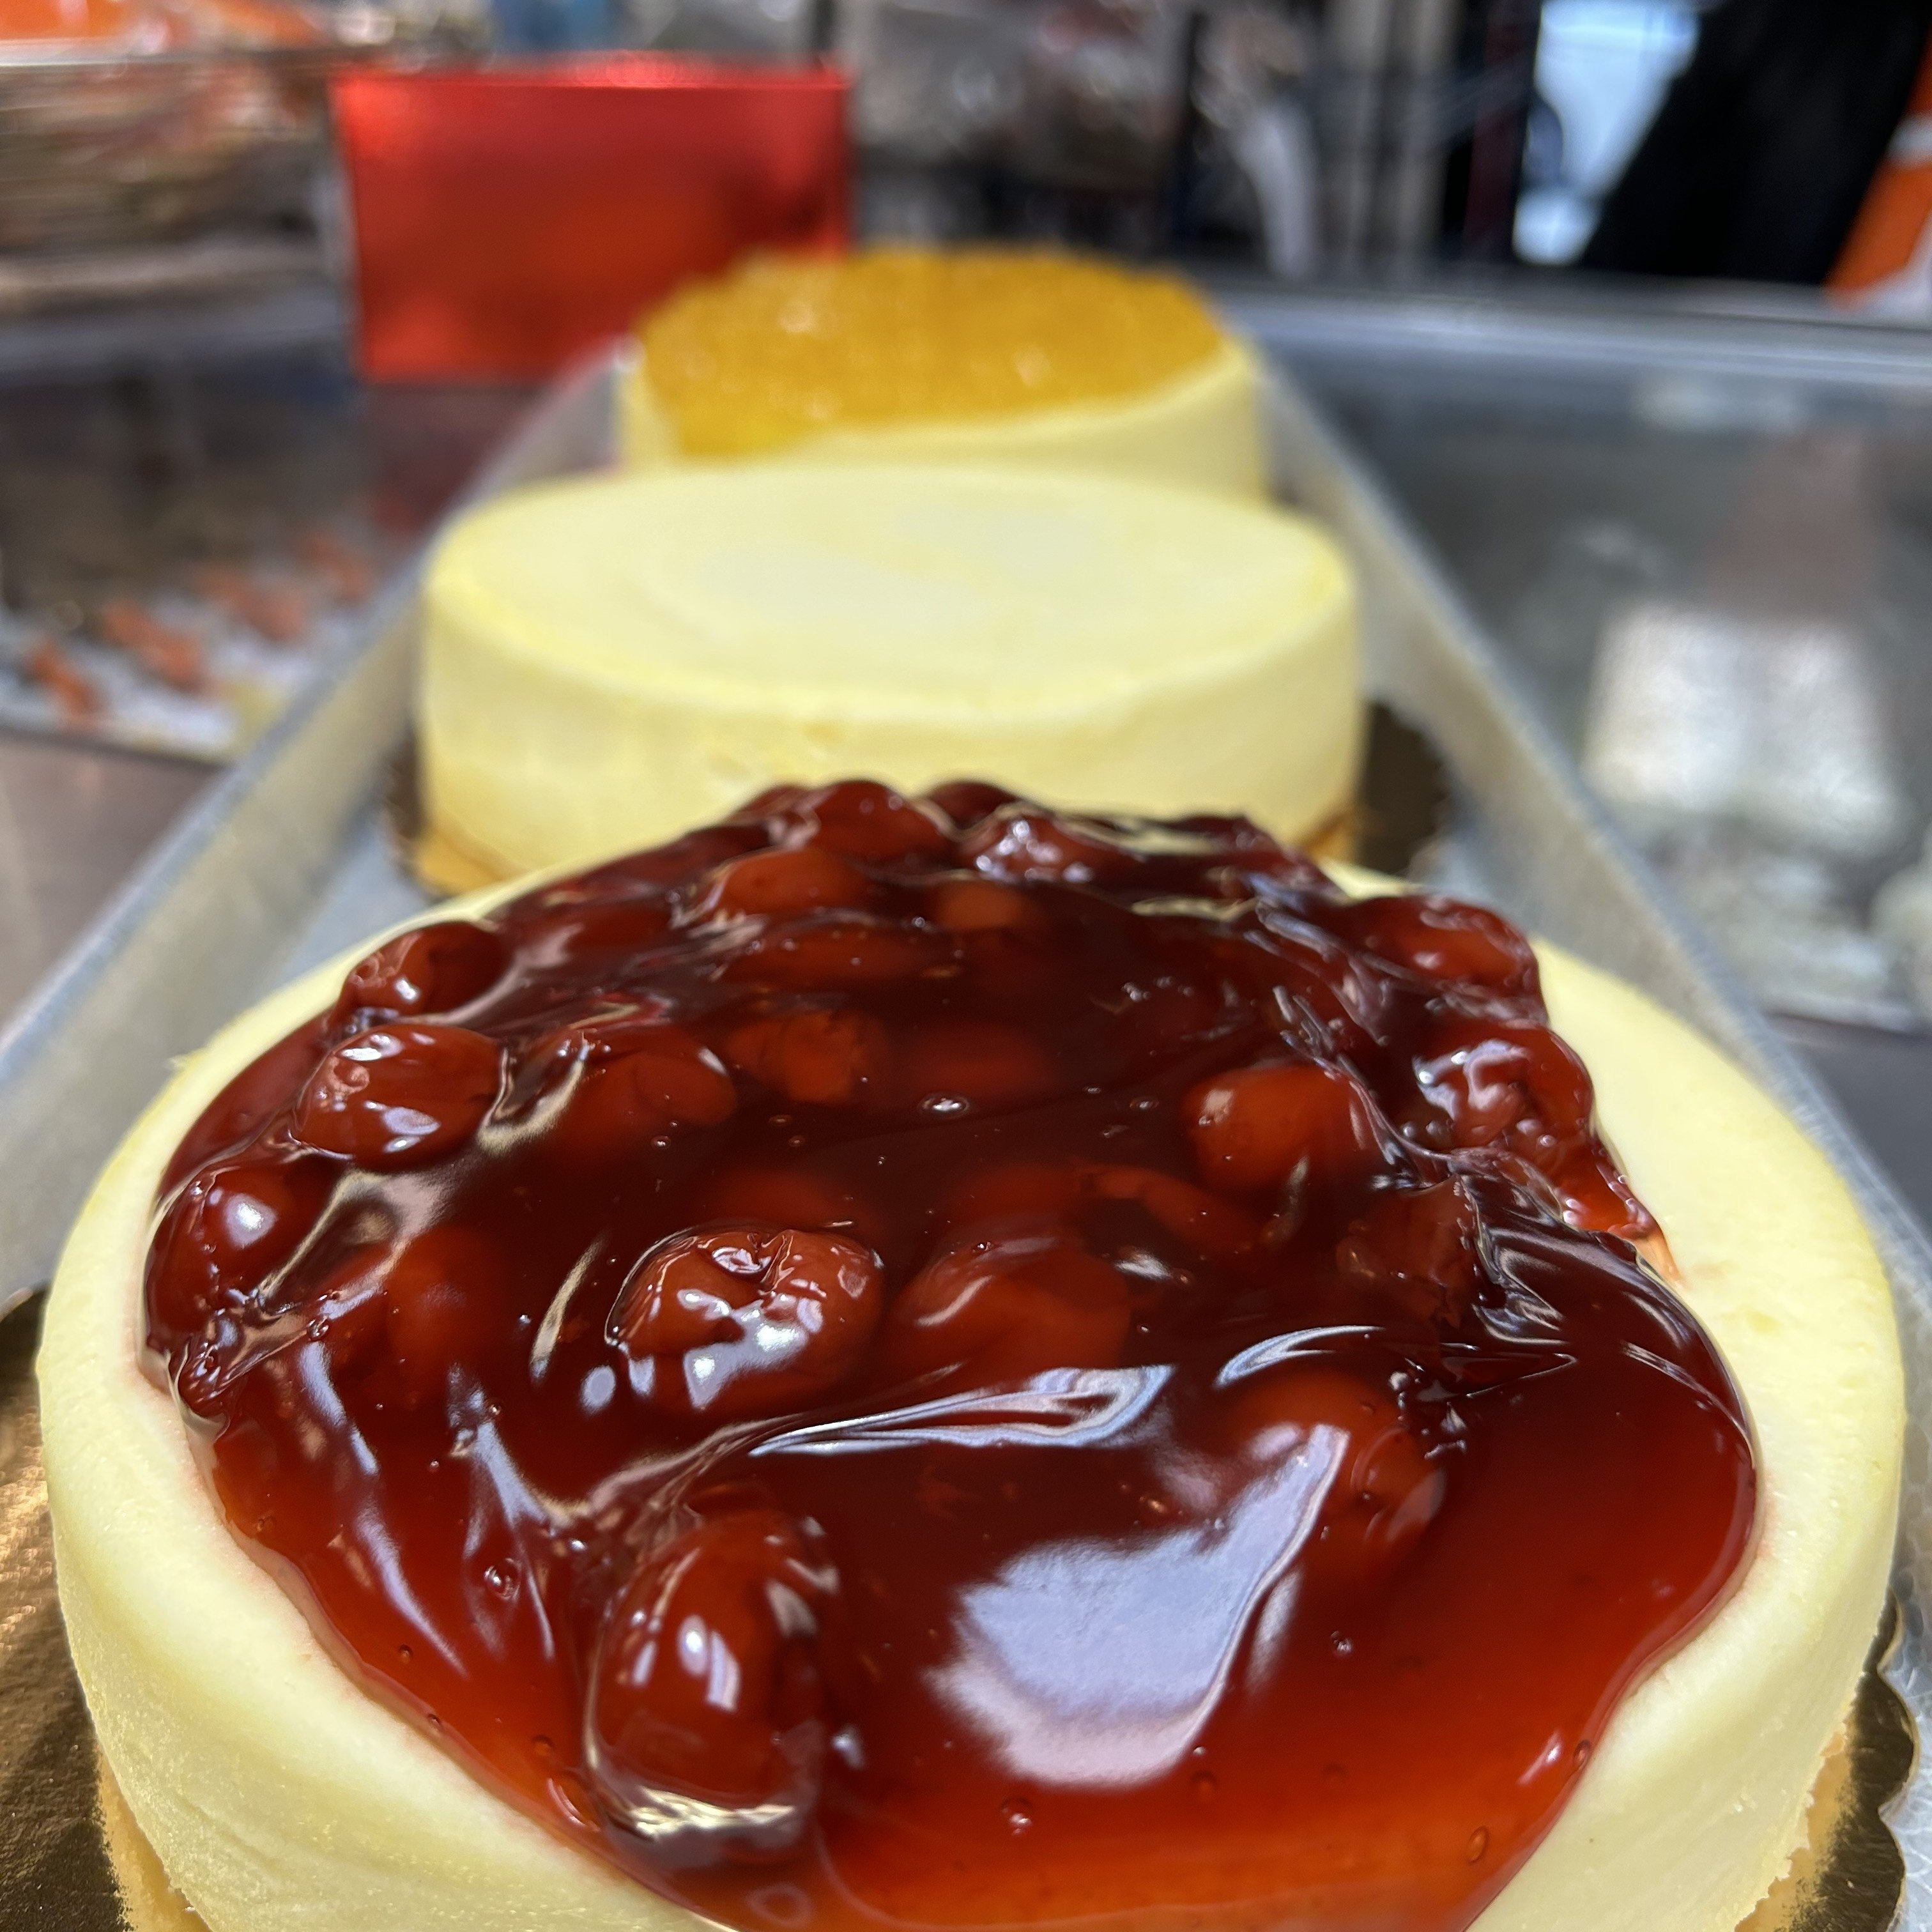 7" NY Cheesecake with Topping